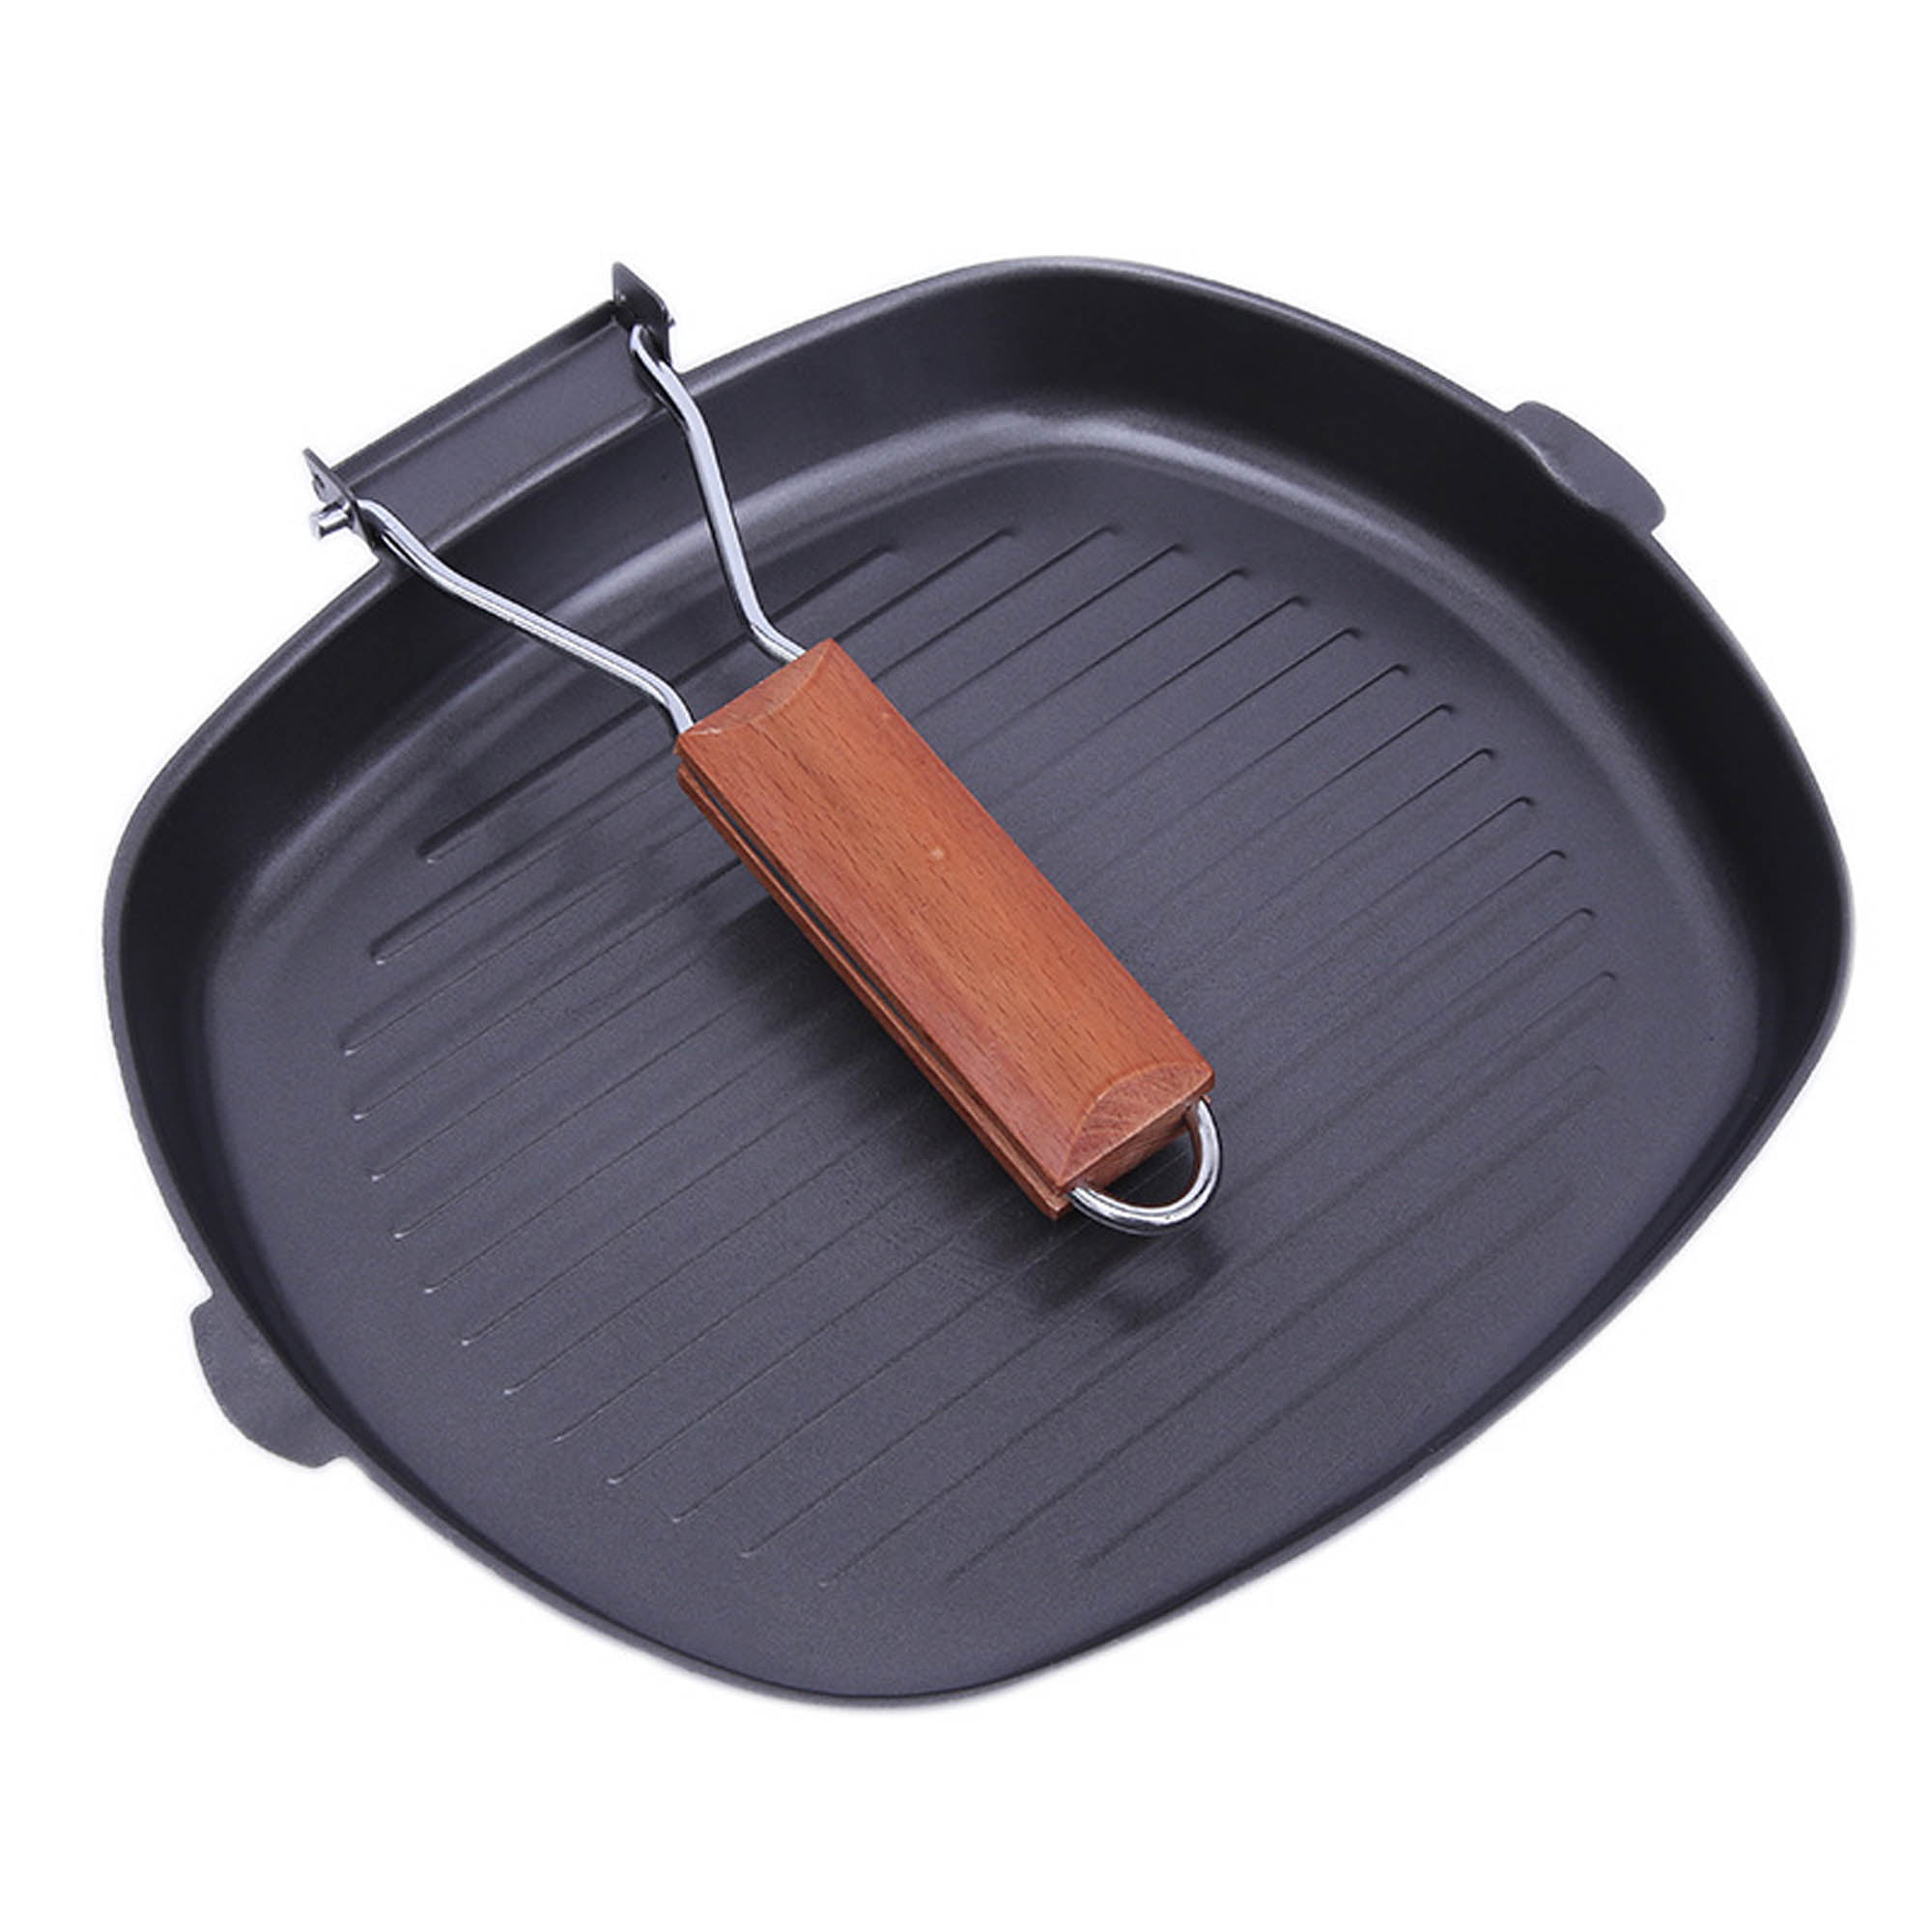 27cm Frying Pan Grill Griddle Cast Iron Non Stick Cooking Skillet Steak 